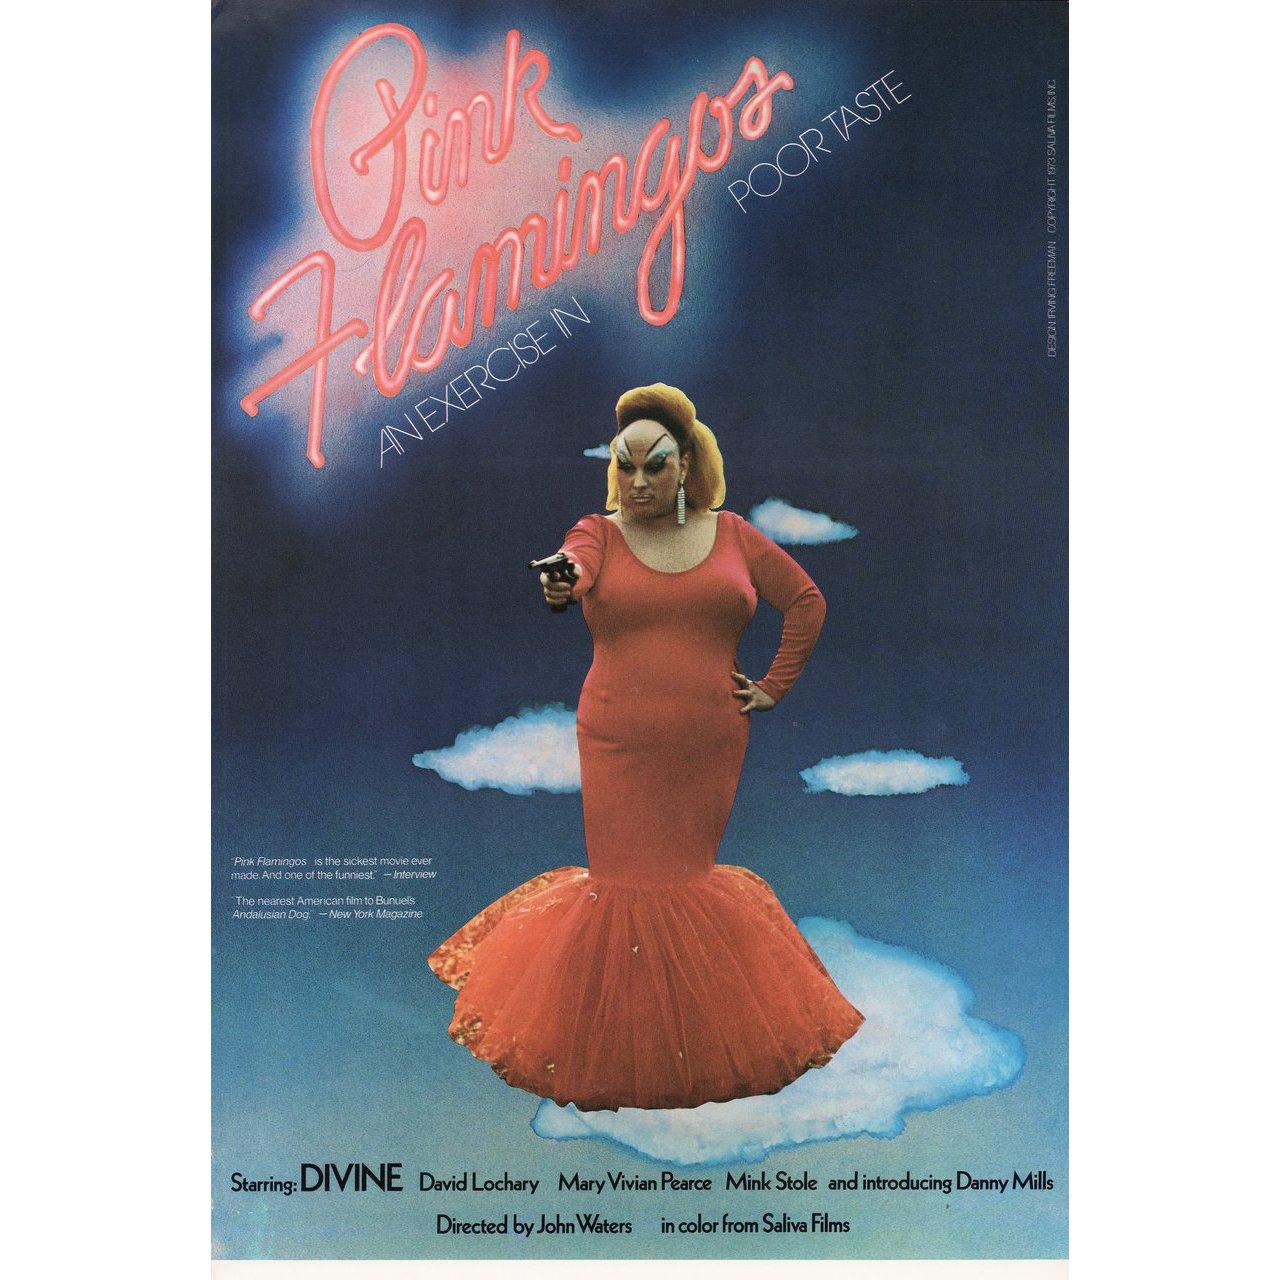 Original 1973 U.S. mini poster by Irving Freeman for the first U.S. theatrical release of the film Pink Flamingos directed by John Waters with Divine / David Lochary / Mary Vivian Pearce / Mink Stole. Very Good-Fine condition, rolled. Please note: